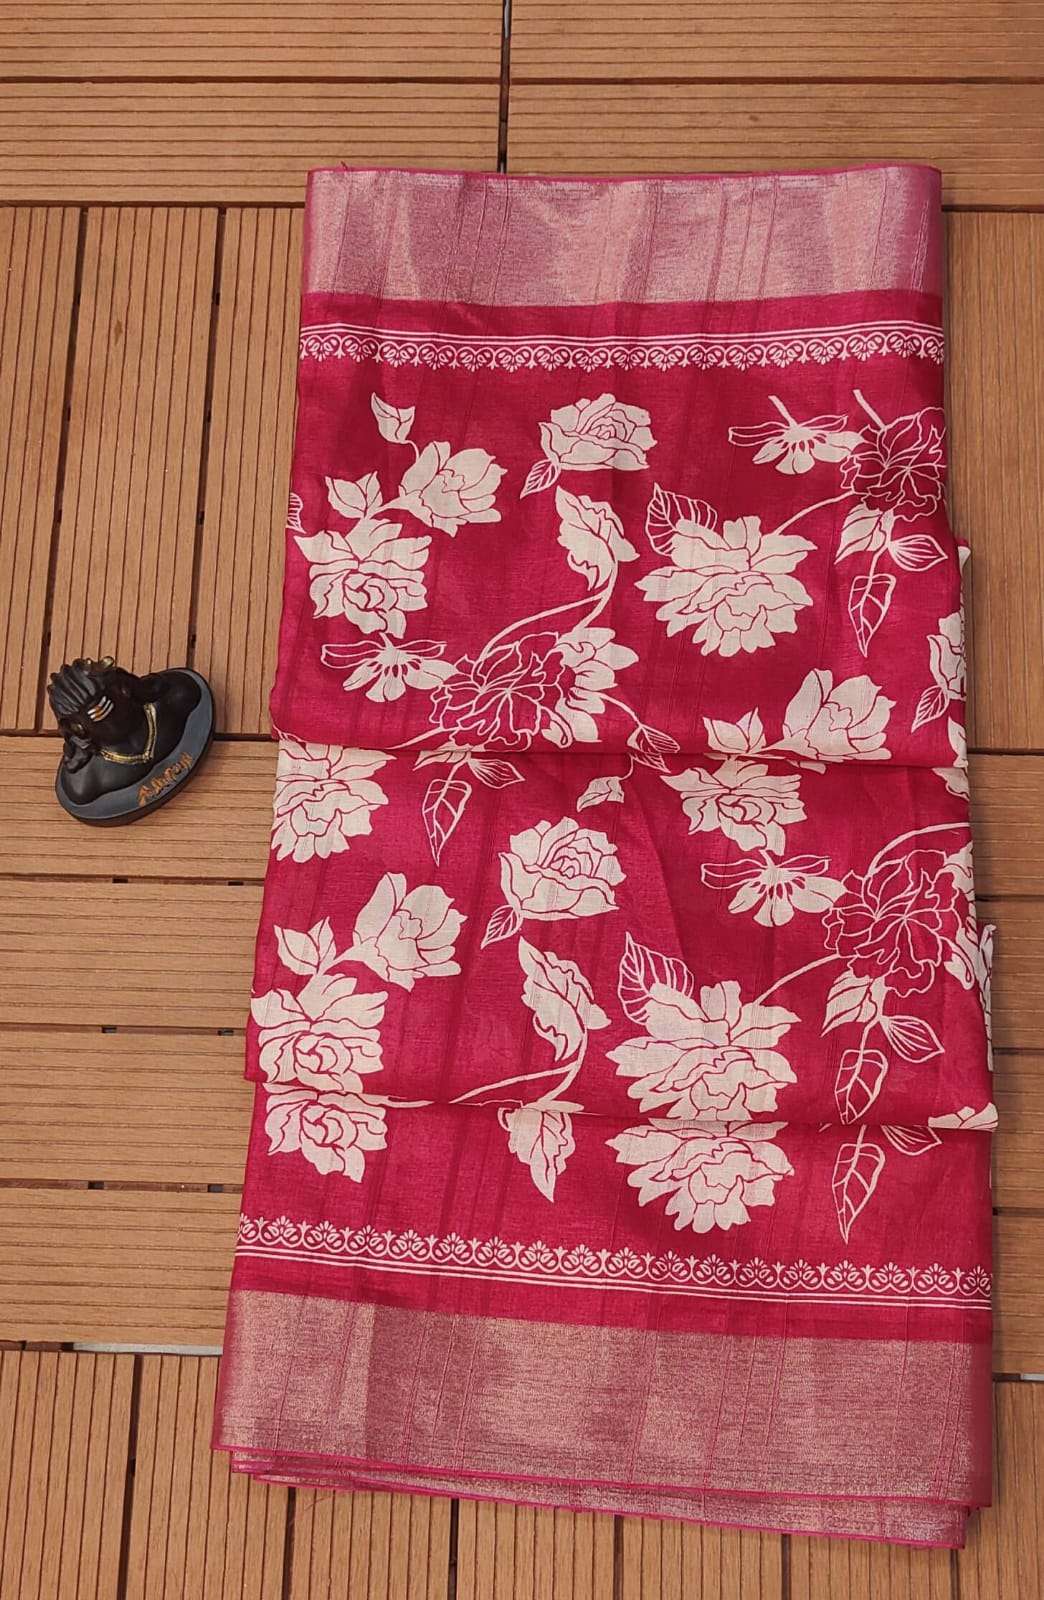 HANDLOOM PRINT WITH DOLA SILK PARTY WEAR SAREE COLLECTION AT...